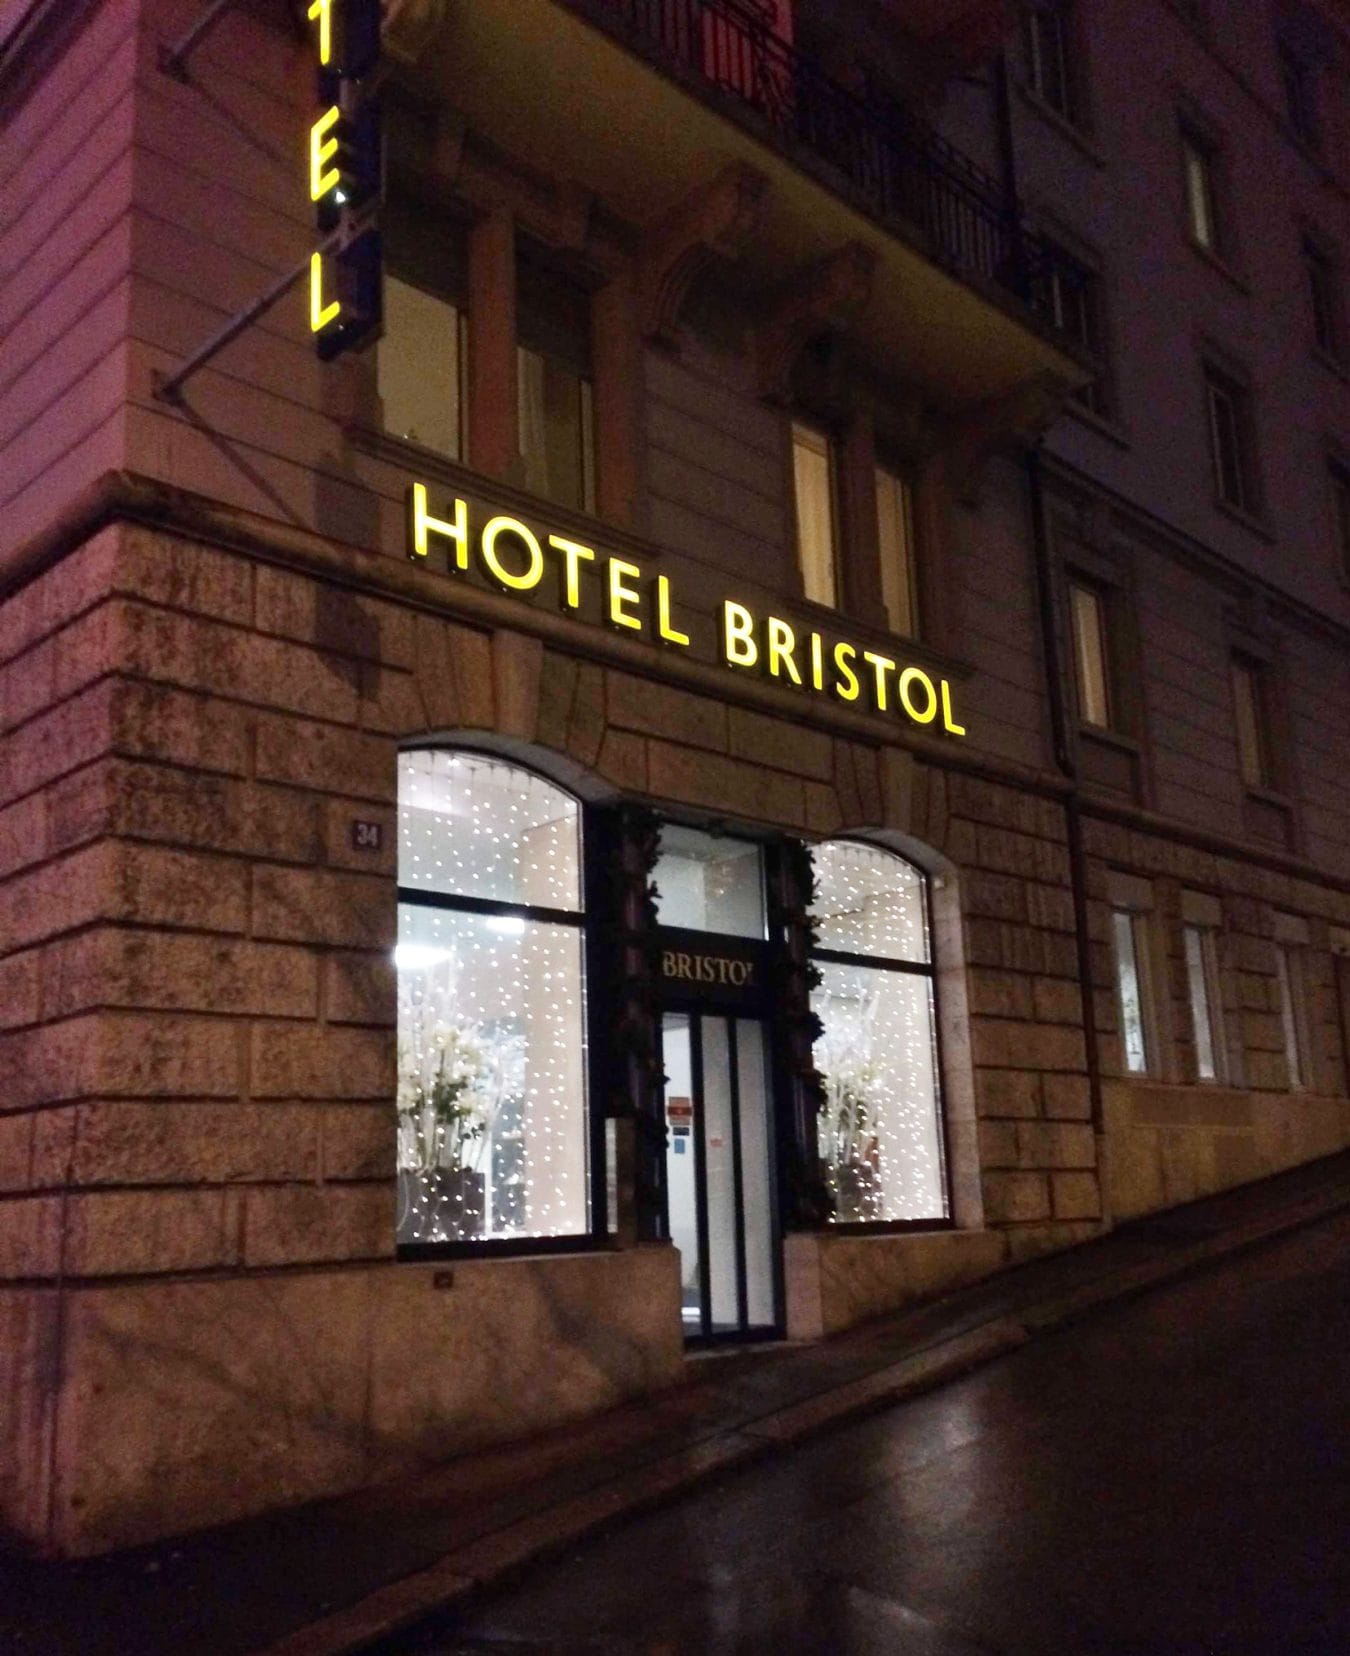 Outside of the Hotel Bristol in Zurich